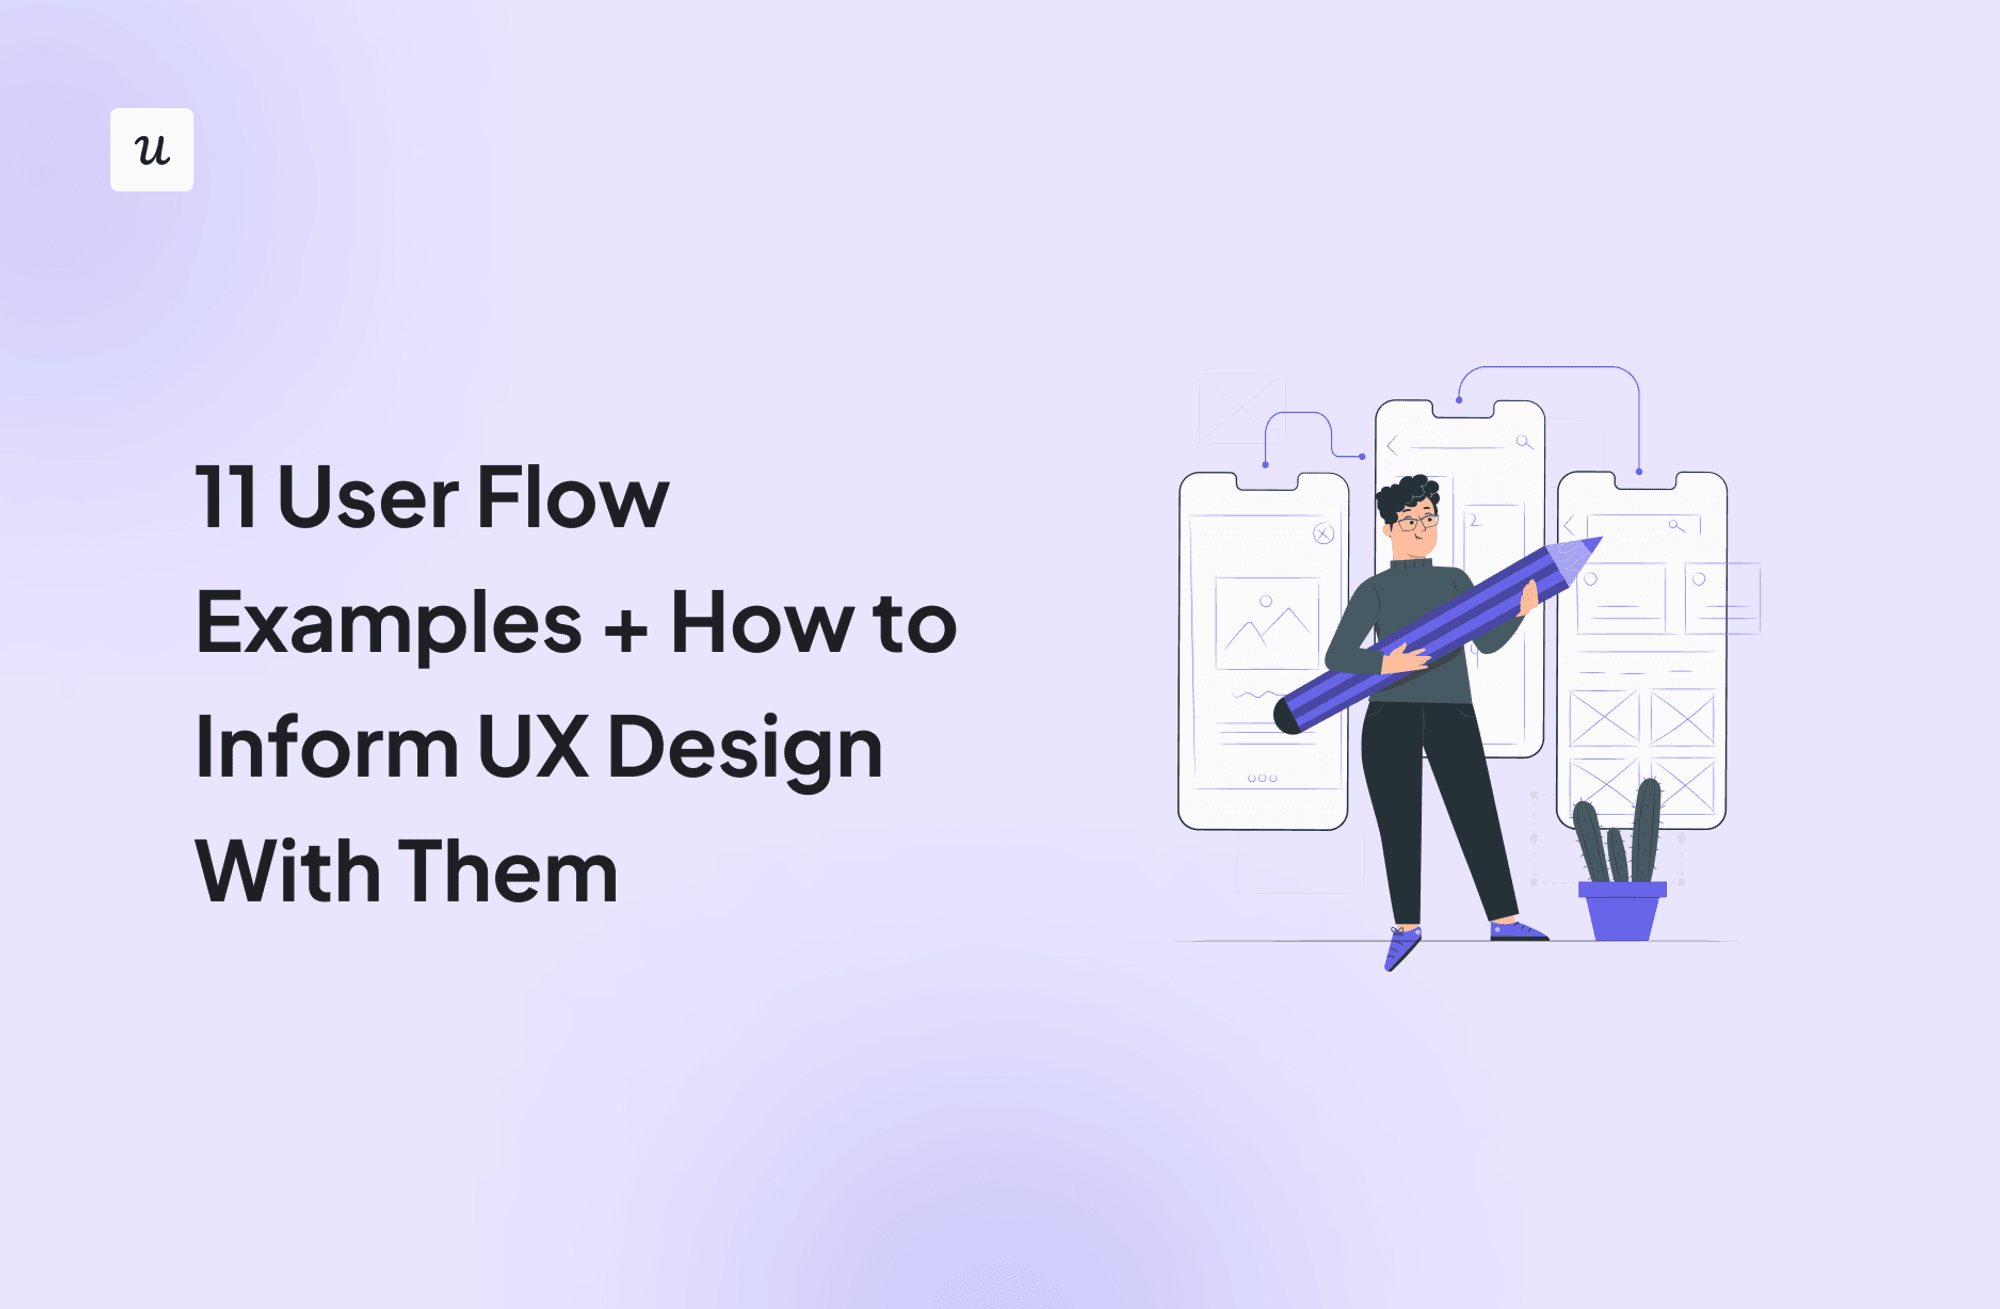 11 User Flow Examples + How to Inform UX Design With Them cover